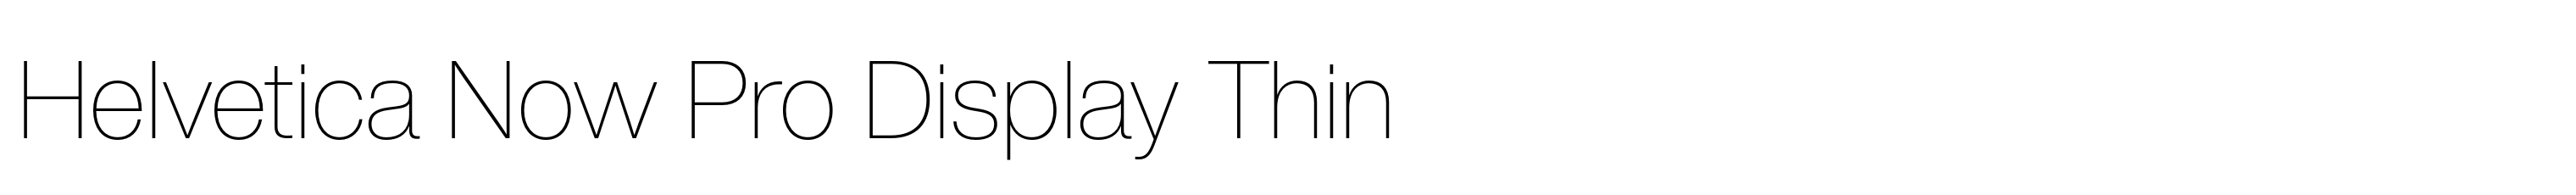 Helvetica Now Pro Display Thin